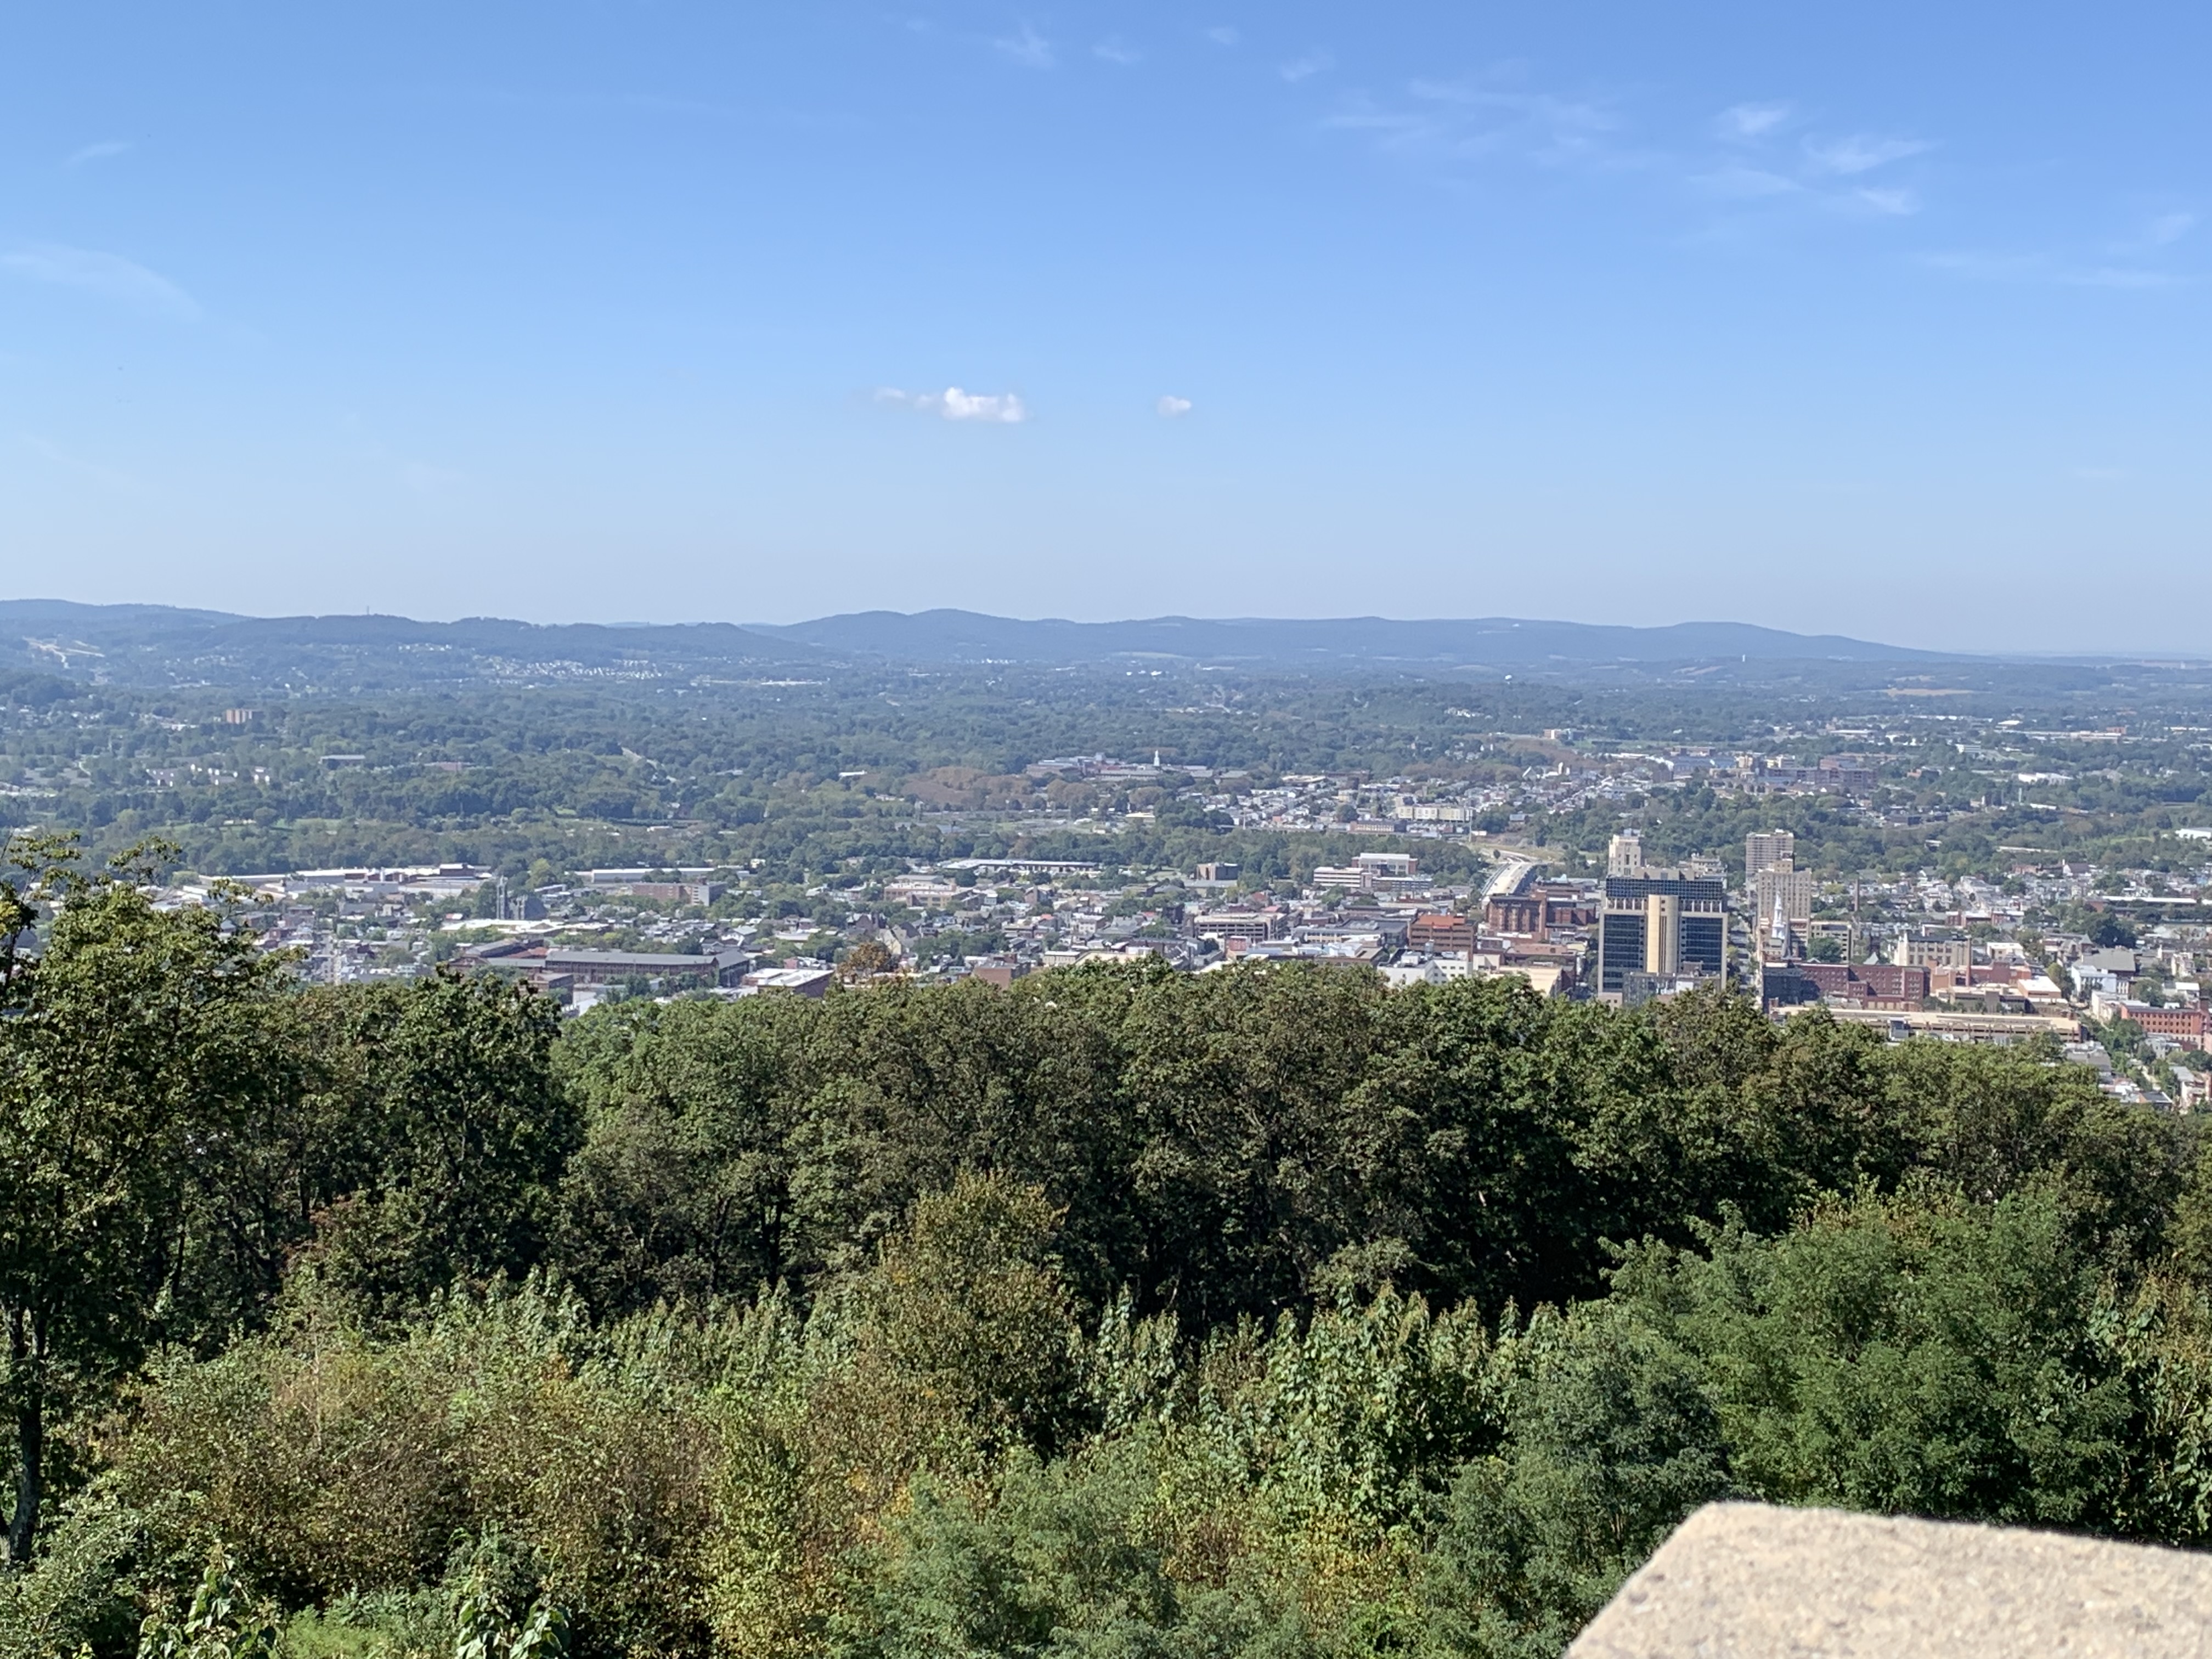 The Reading Pagoda, view over Reading, PA